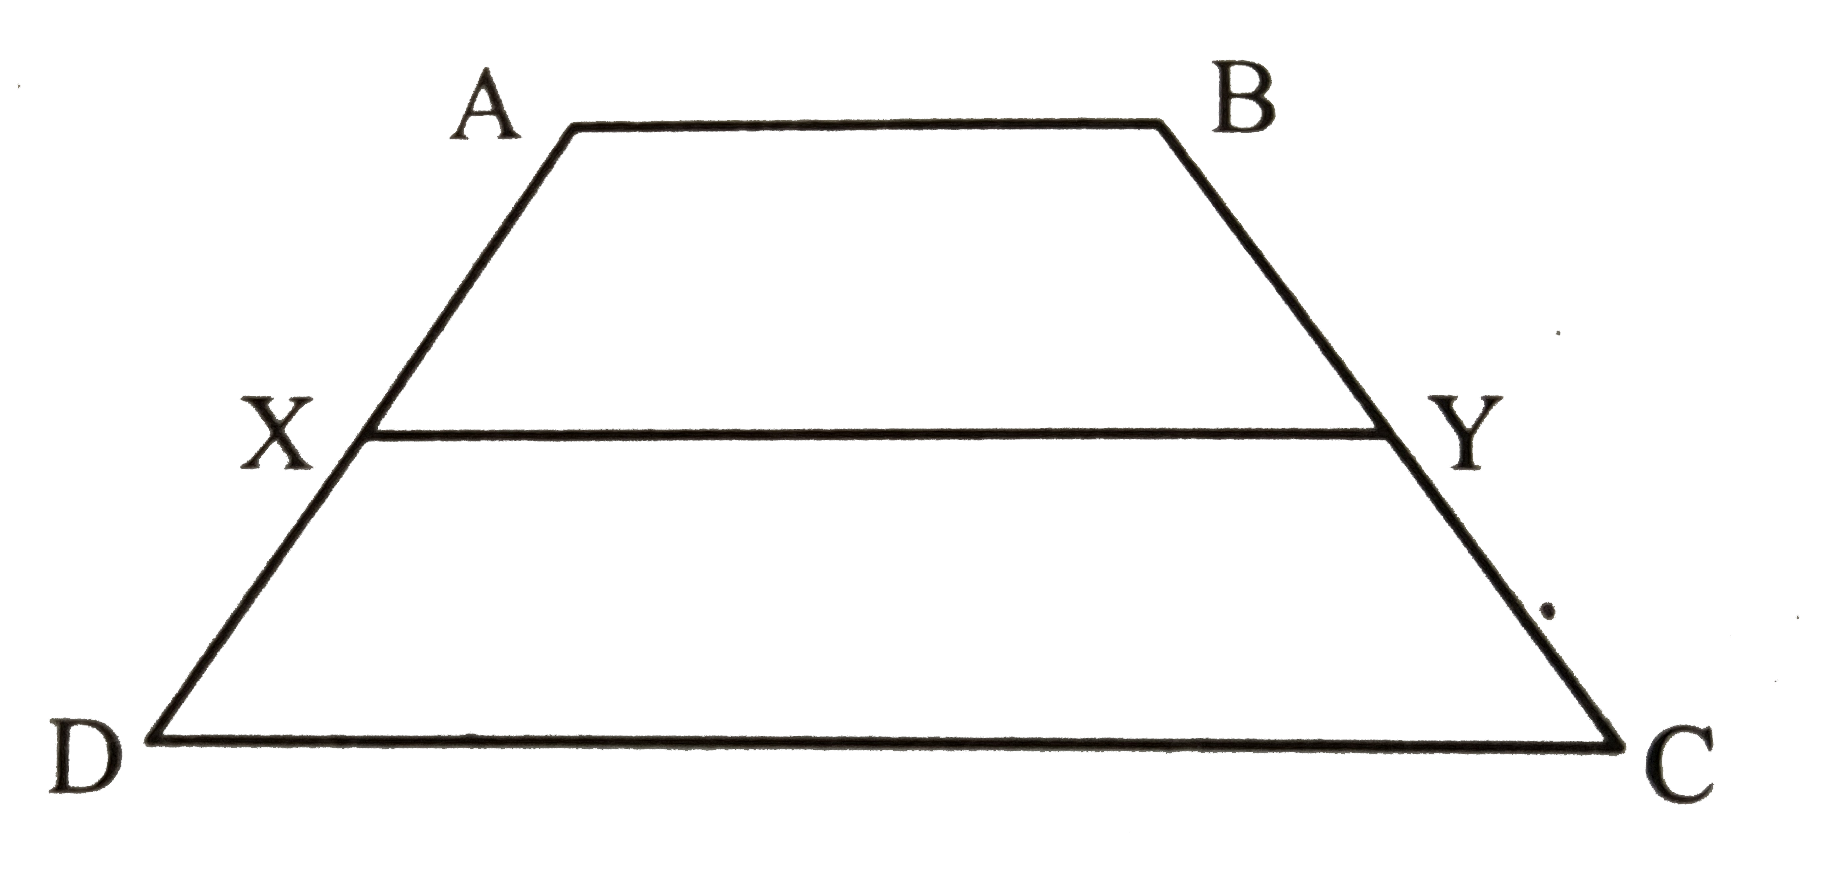 ABCD is a trapezoid. PQRS and MLKJ are two rhombus. Diagonal of PQRS are 6 cm and 8 cm. One of the ang e of MLKJ is 120 degree and the diagonal bisecting that angle measures 15cm. Side of PQRS = AB, side of MLKJ = CD. Find XY (median of trapezoid)